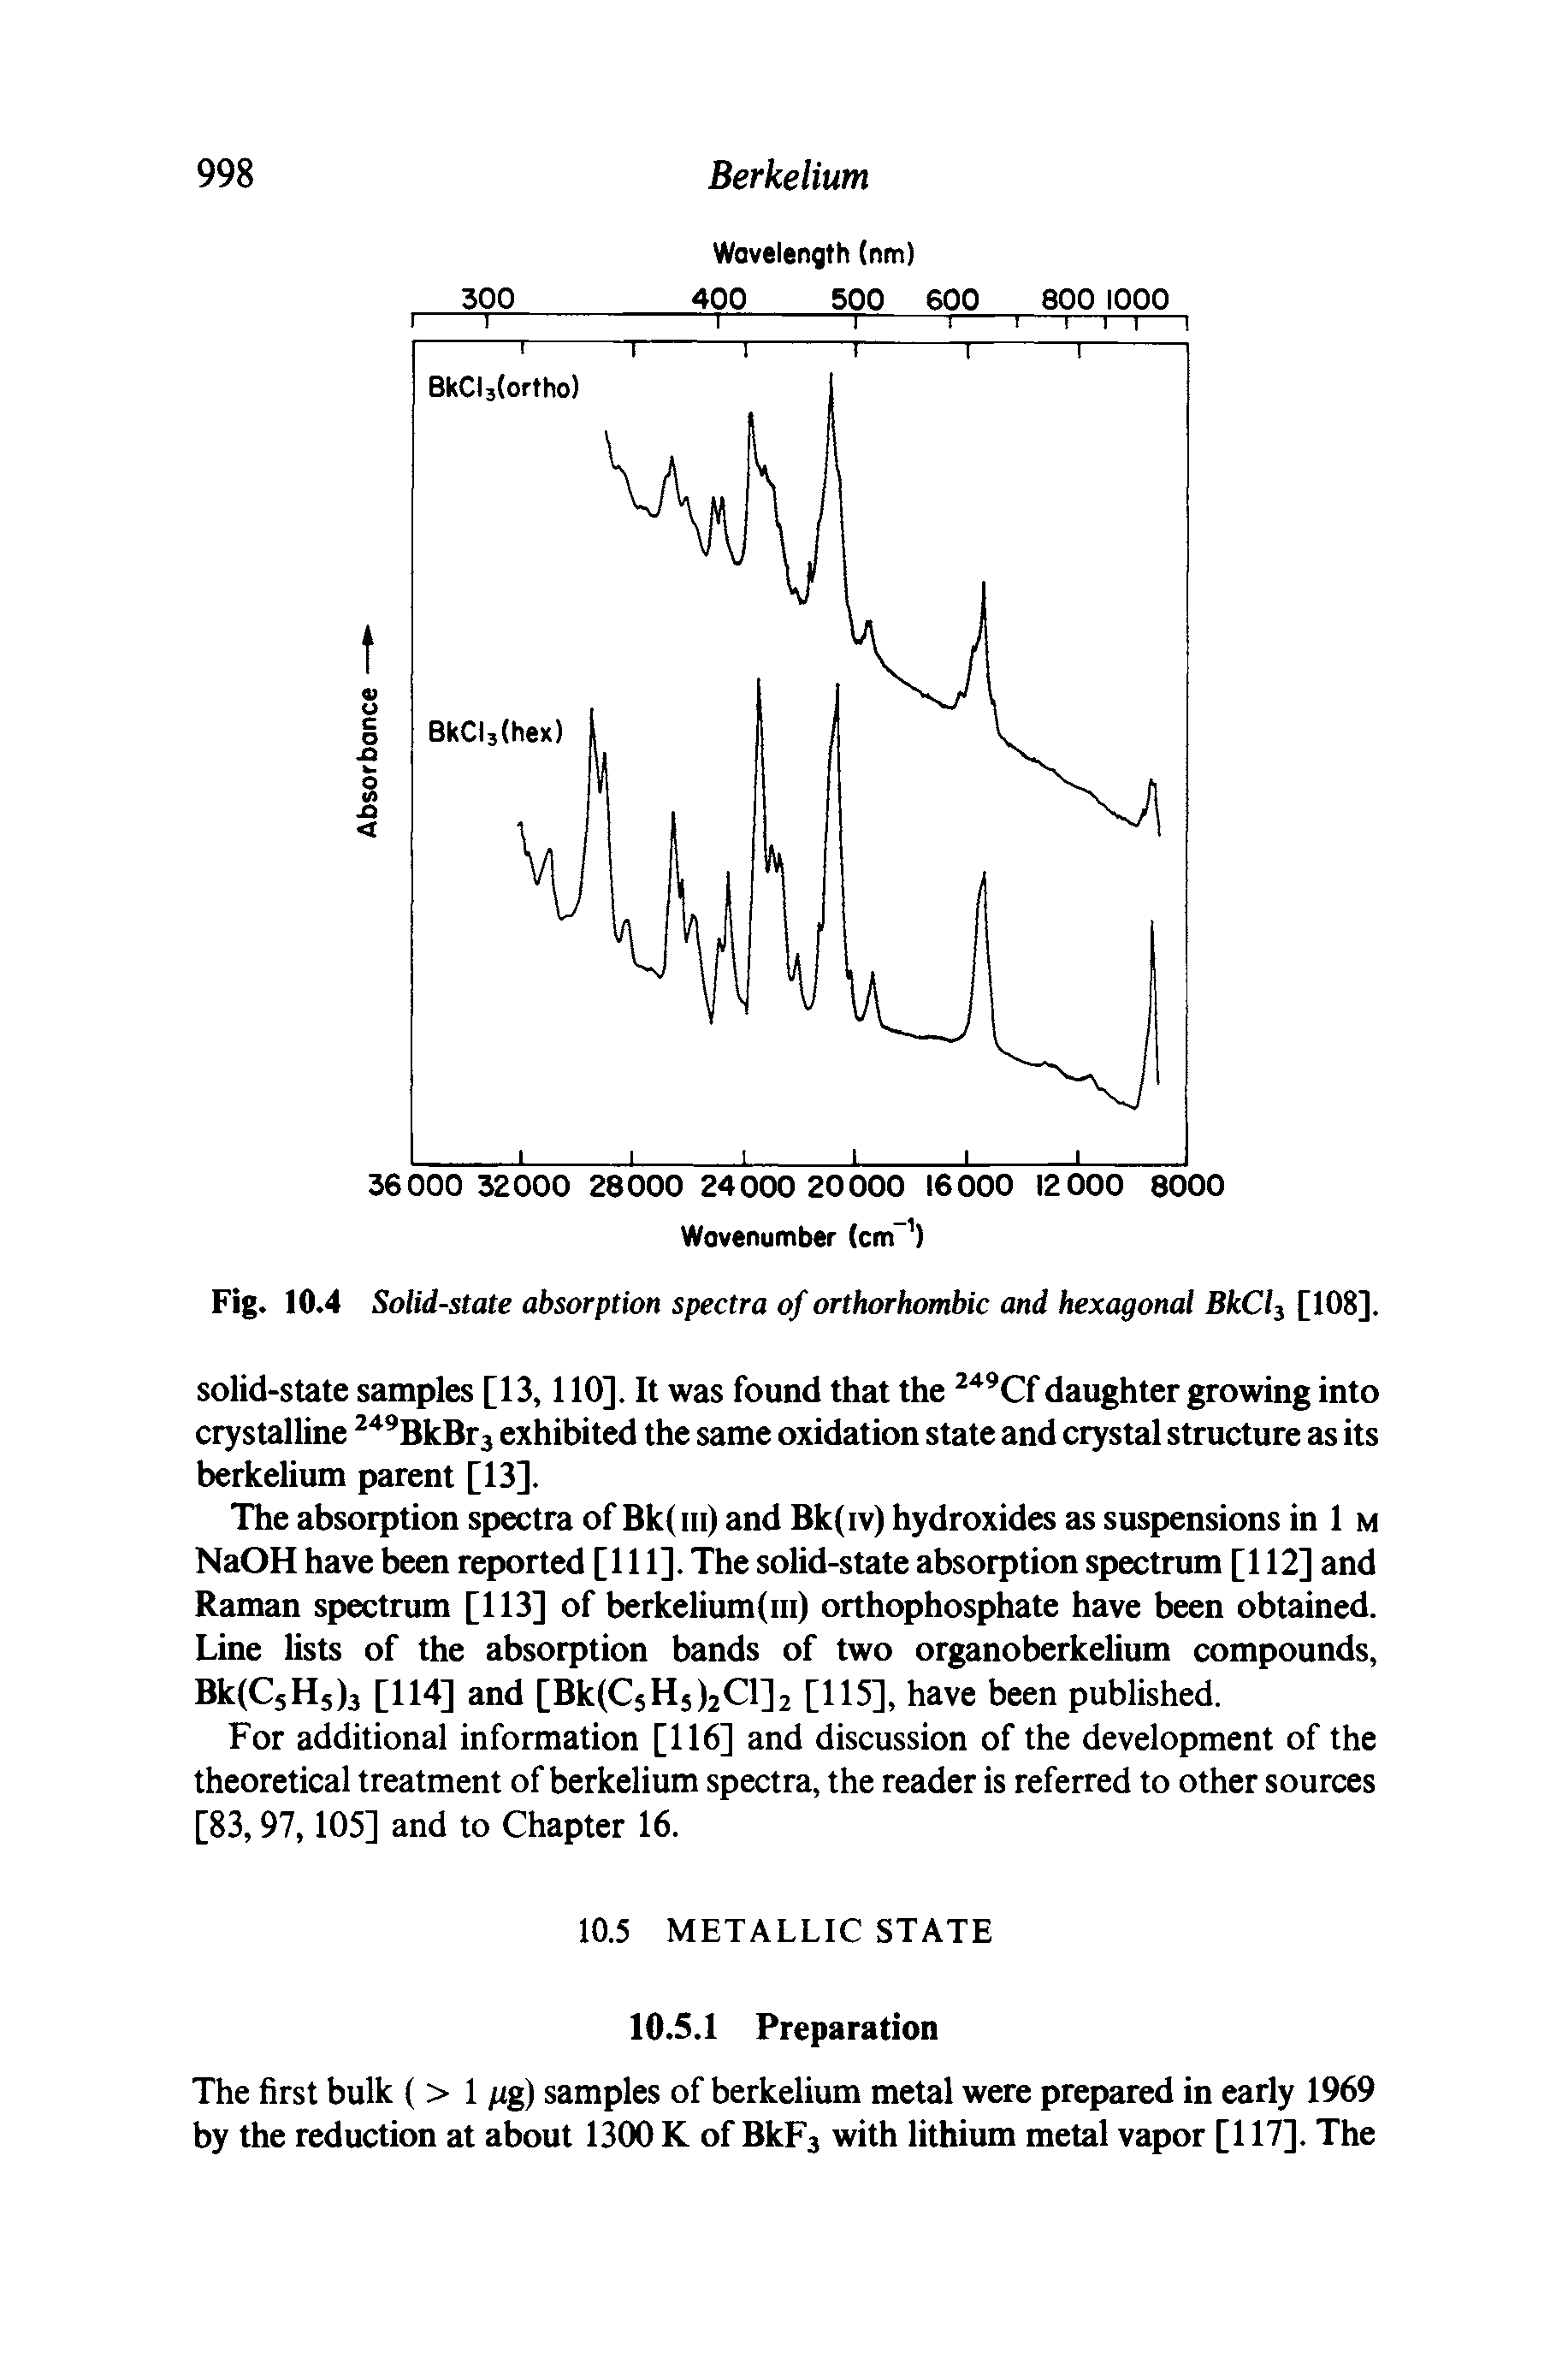 Fig. 10.4 Solid-state absorption spectra of orthorhombic and hexagonal BkCl [108].